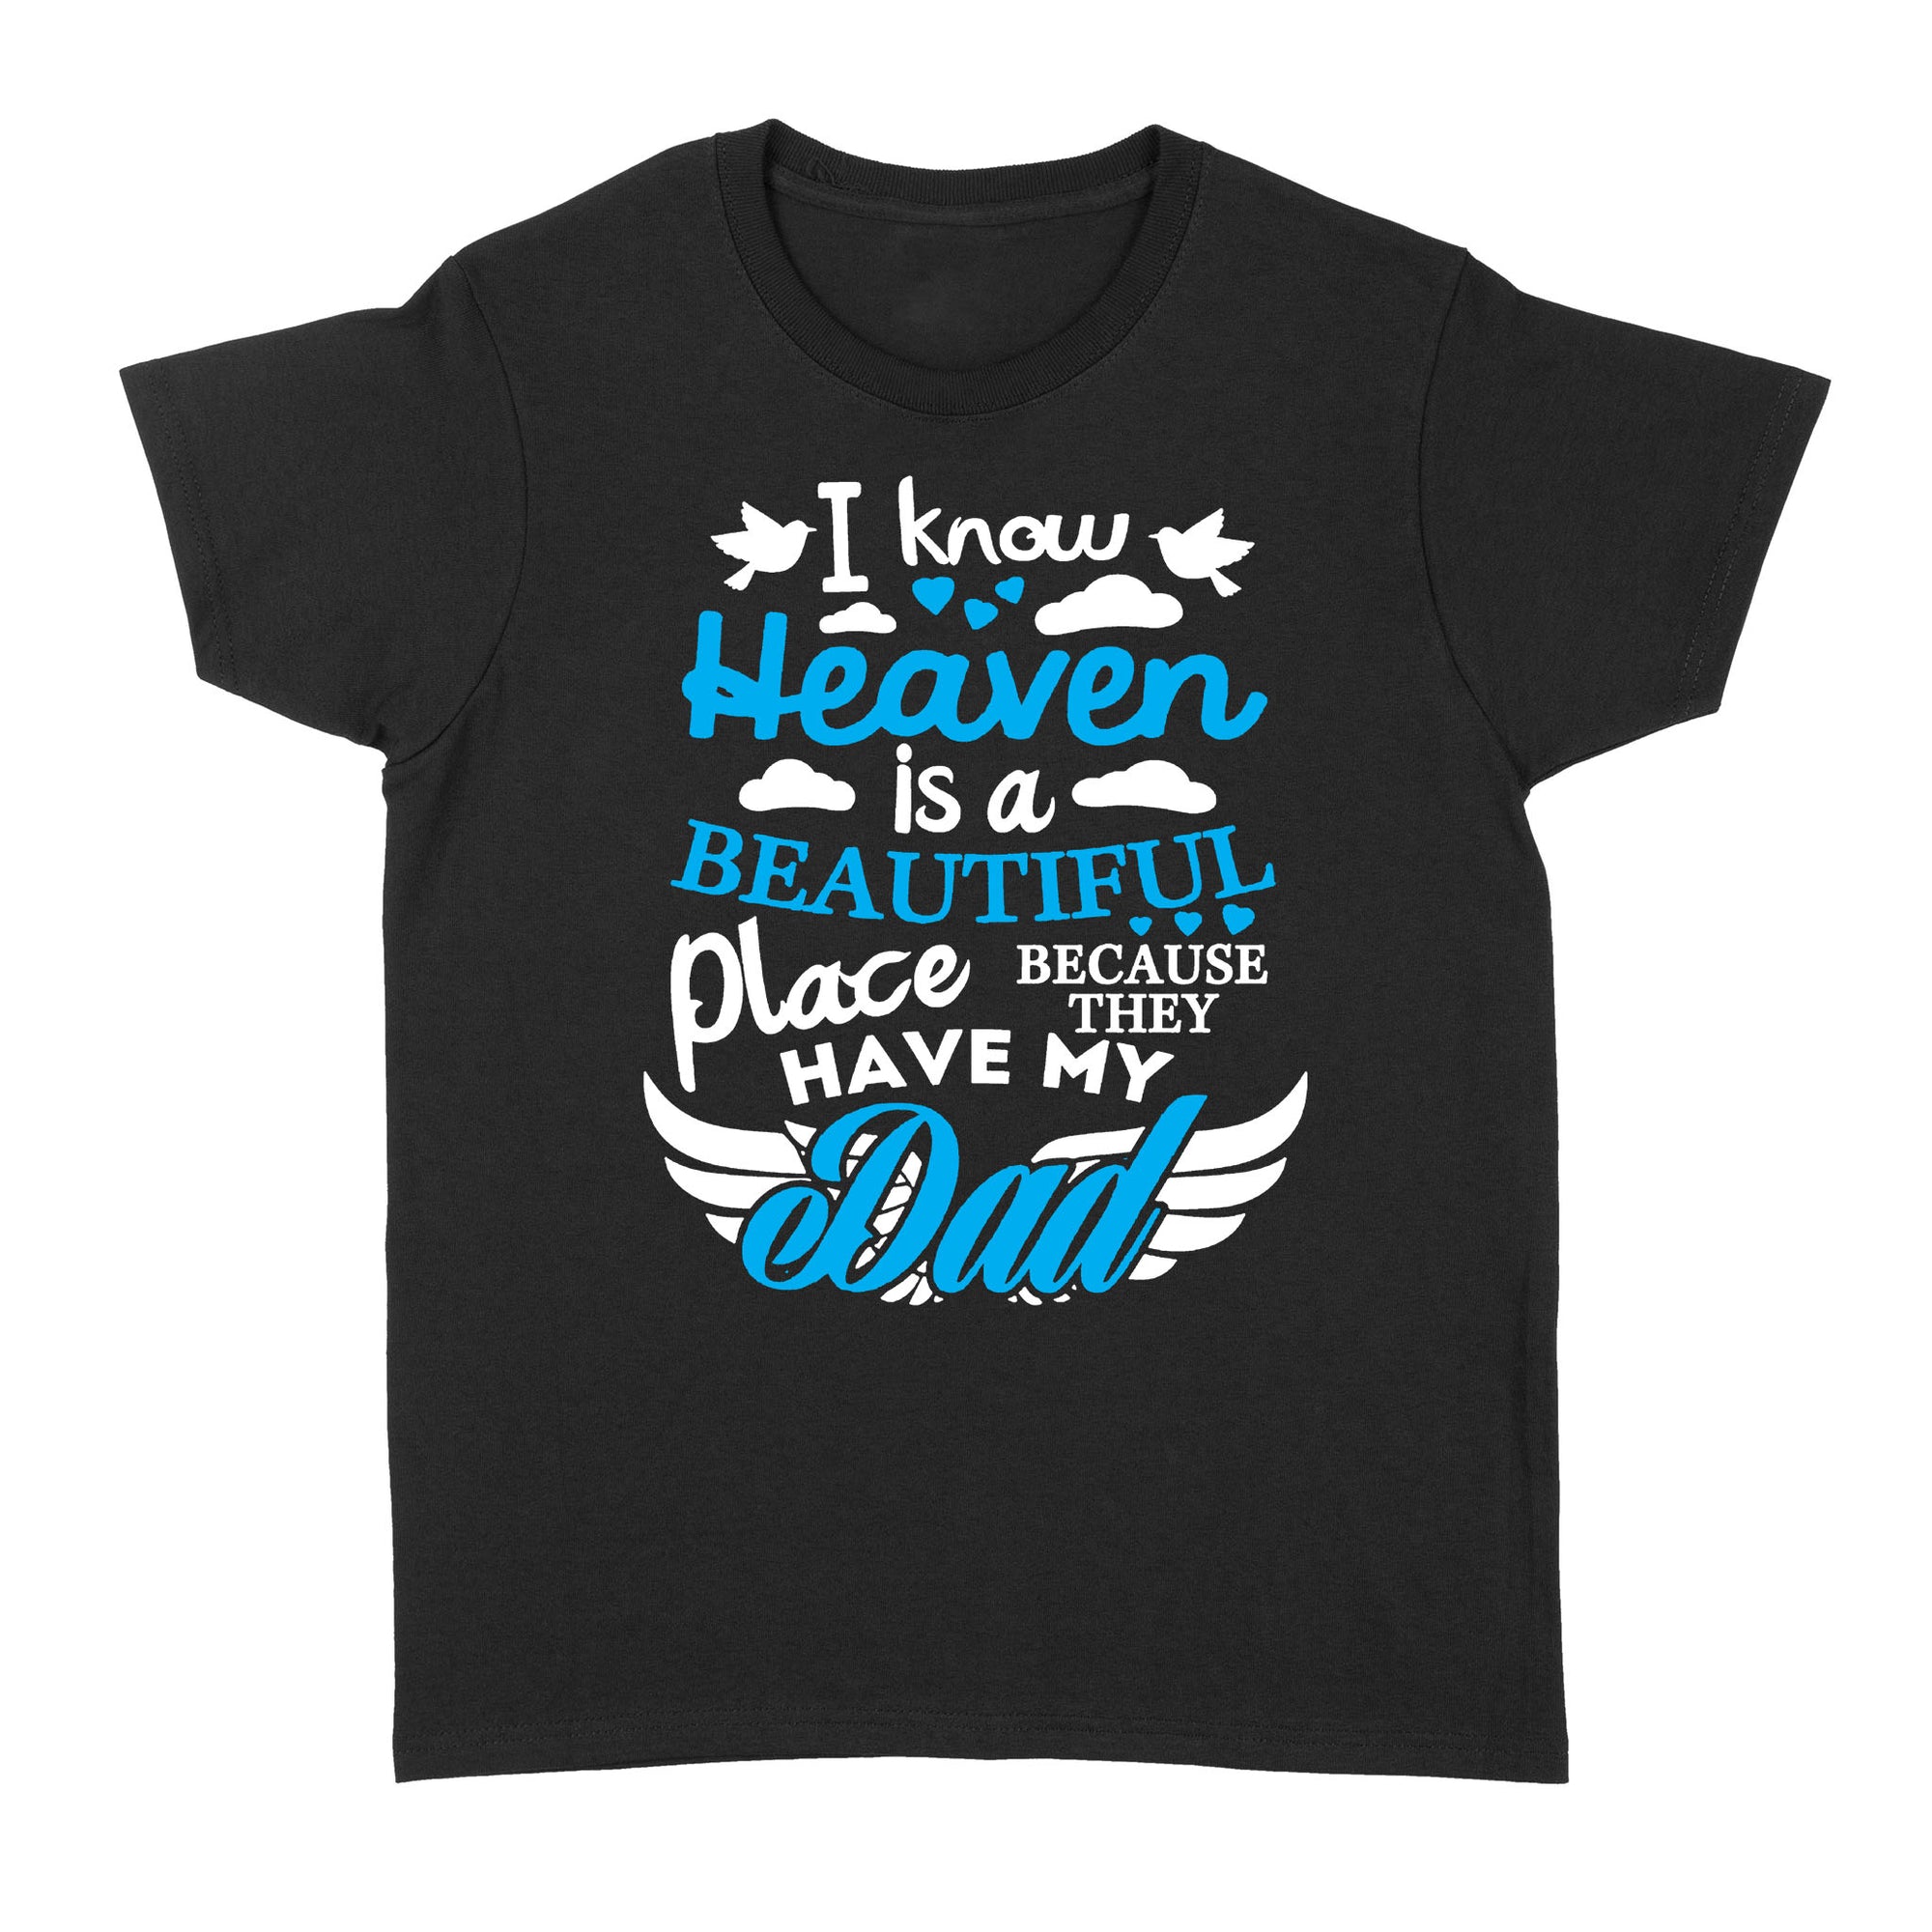 Gift Ideas for Daughter I Know Heaven Is A Beautiful Place Because They Have My Dad (2) - Standard Women's T-shirt